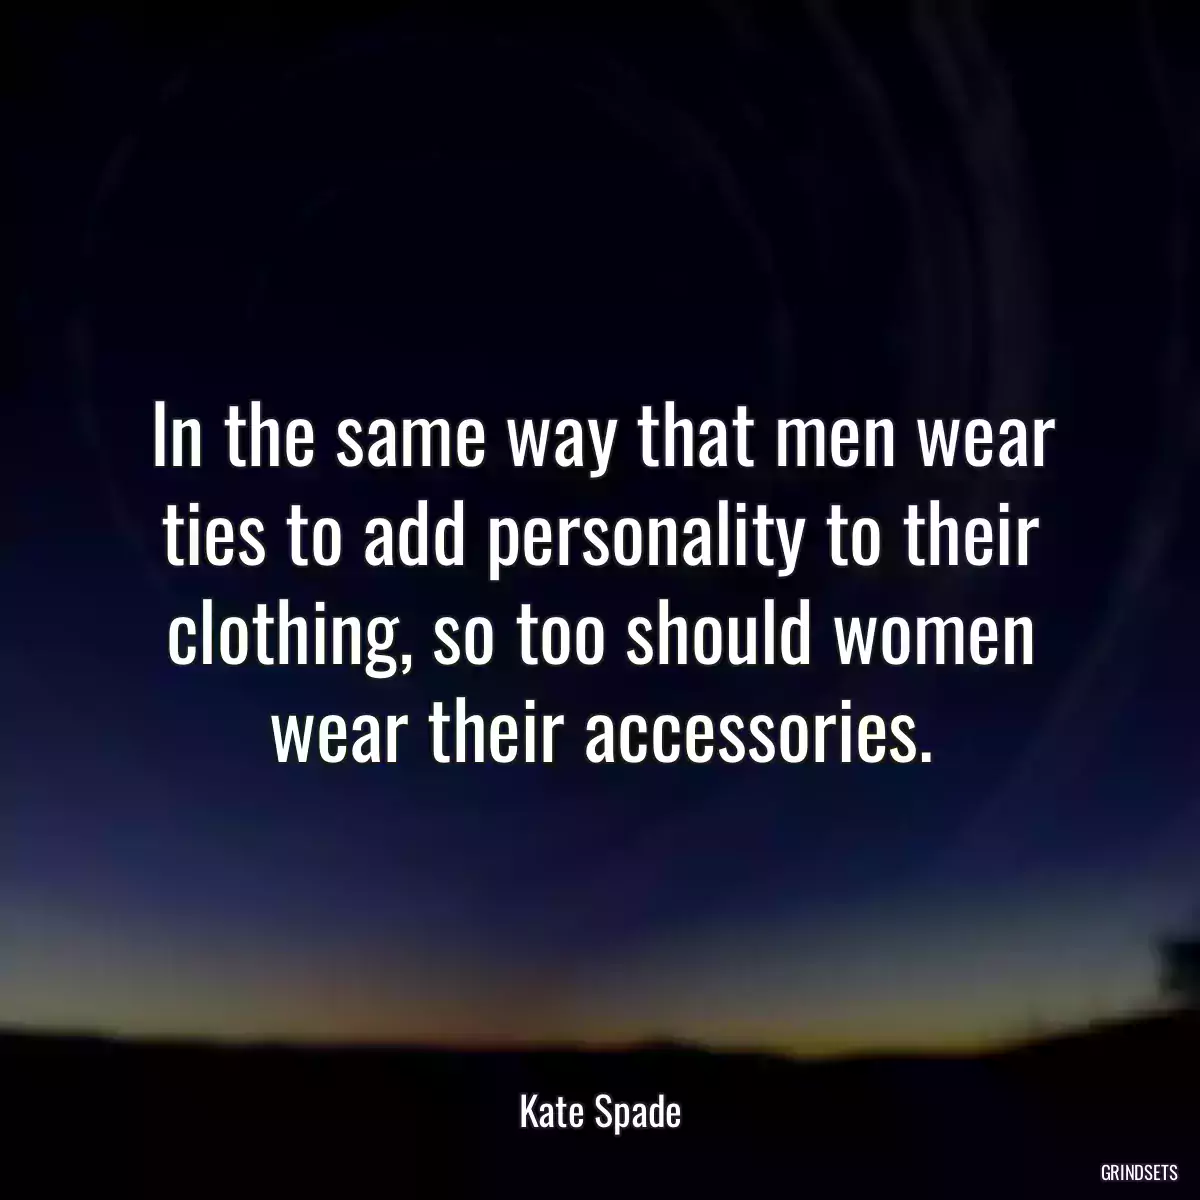 In the same way that men wear ties to add personality to their clothing, so too should women wear their accessories.